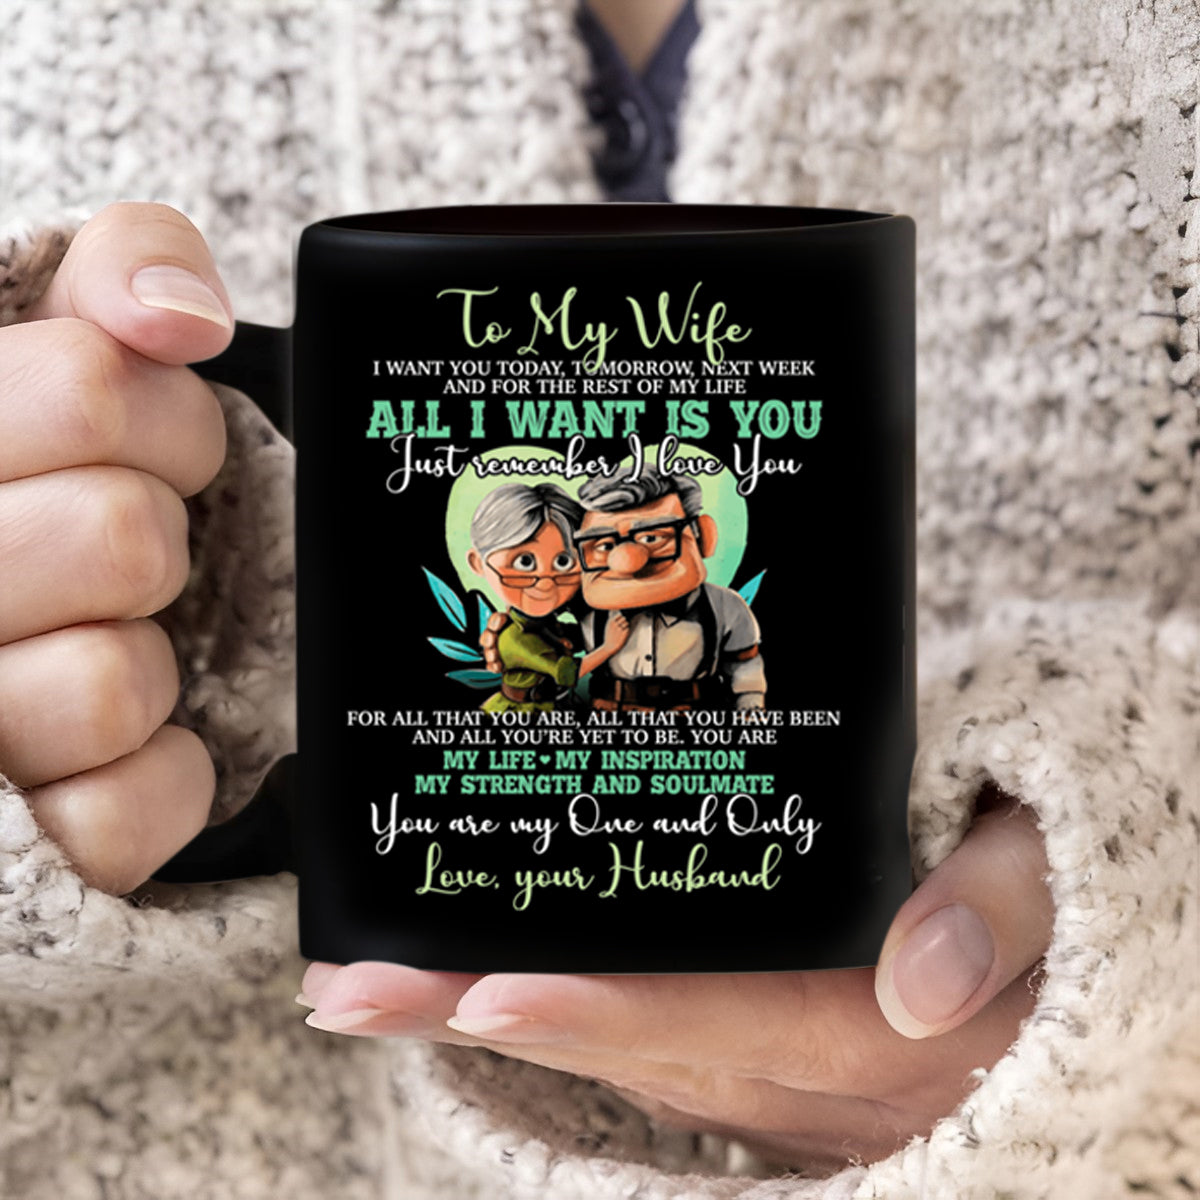 To My Wife I Want You Today Tomorrow Next Week All I Want Is You Coffee Mug